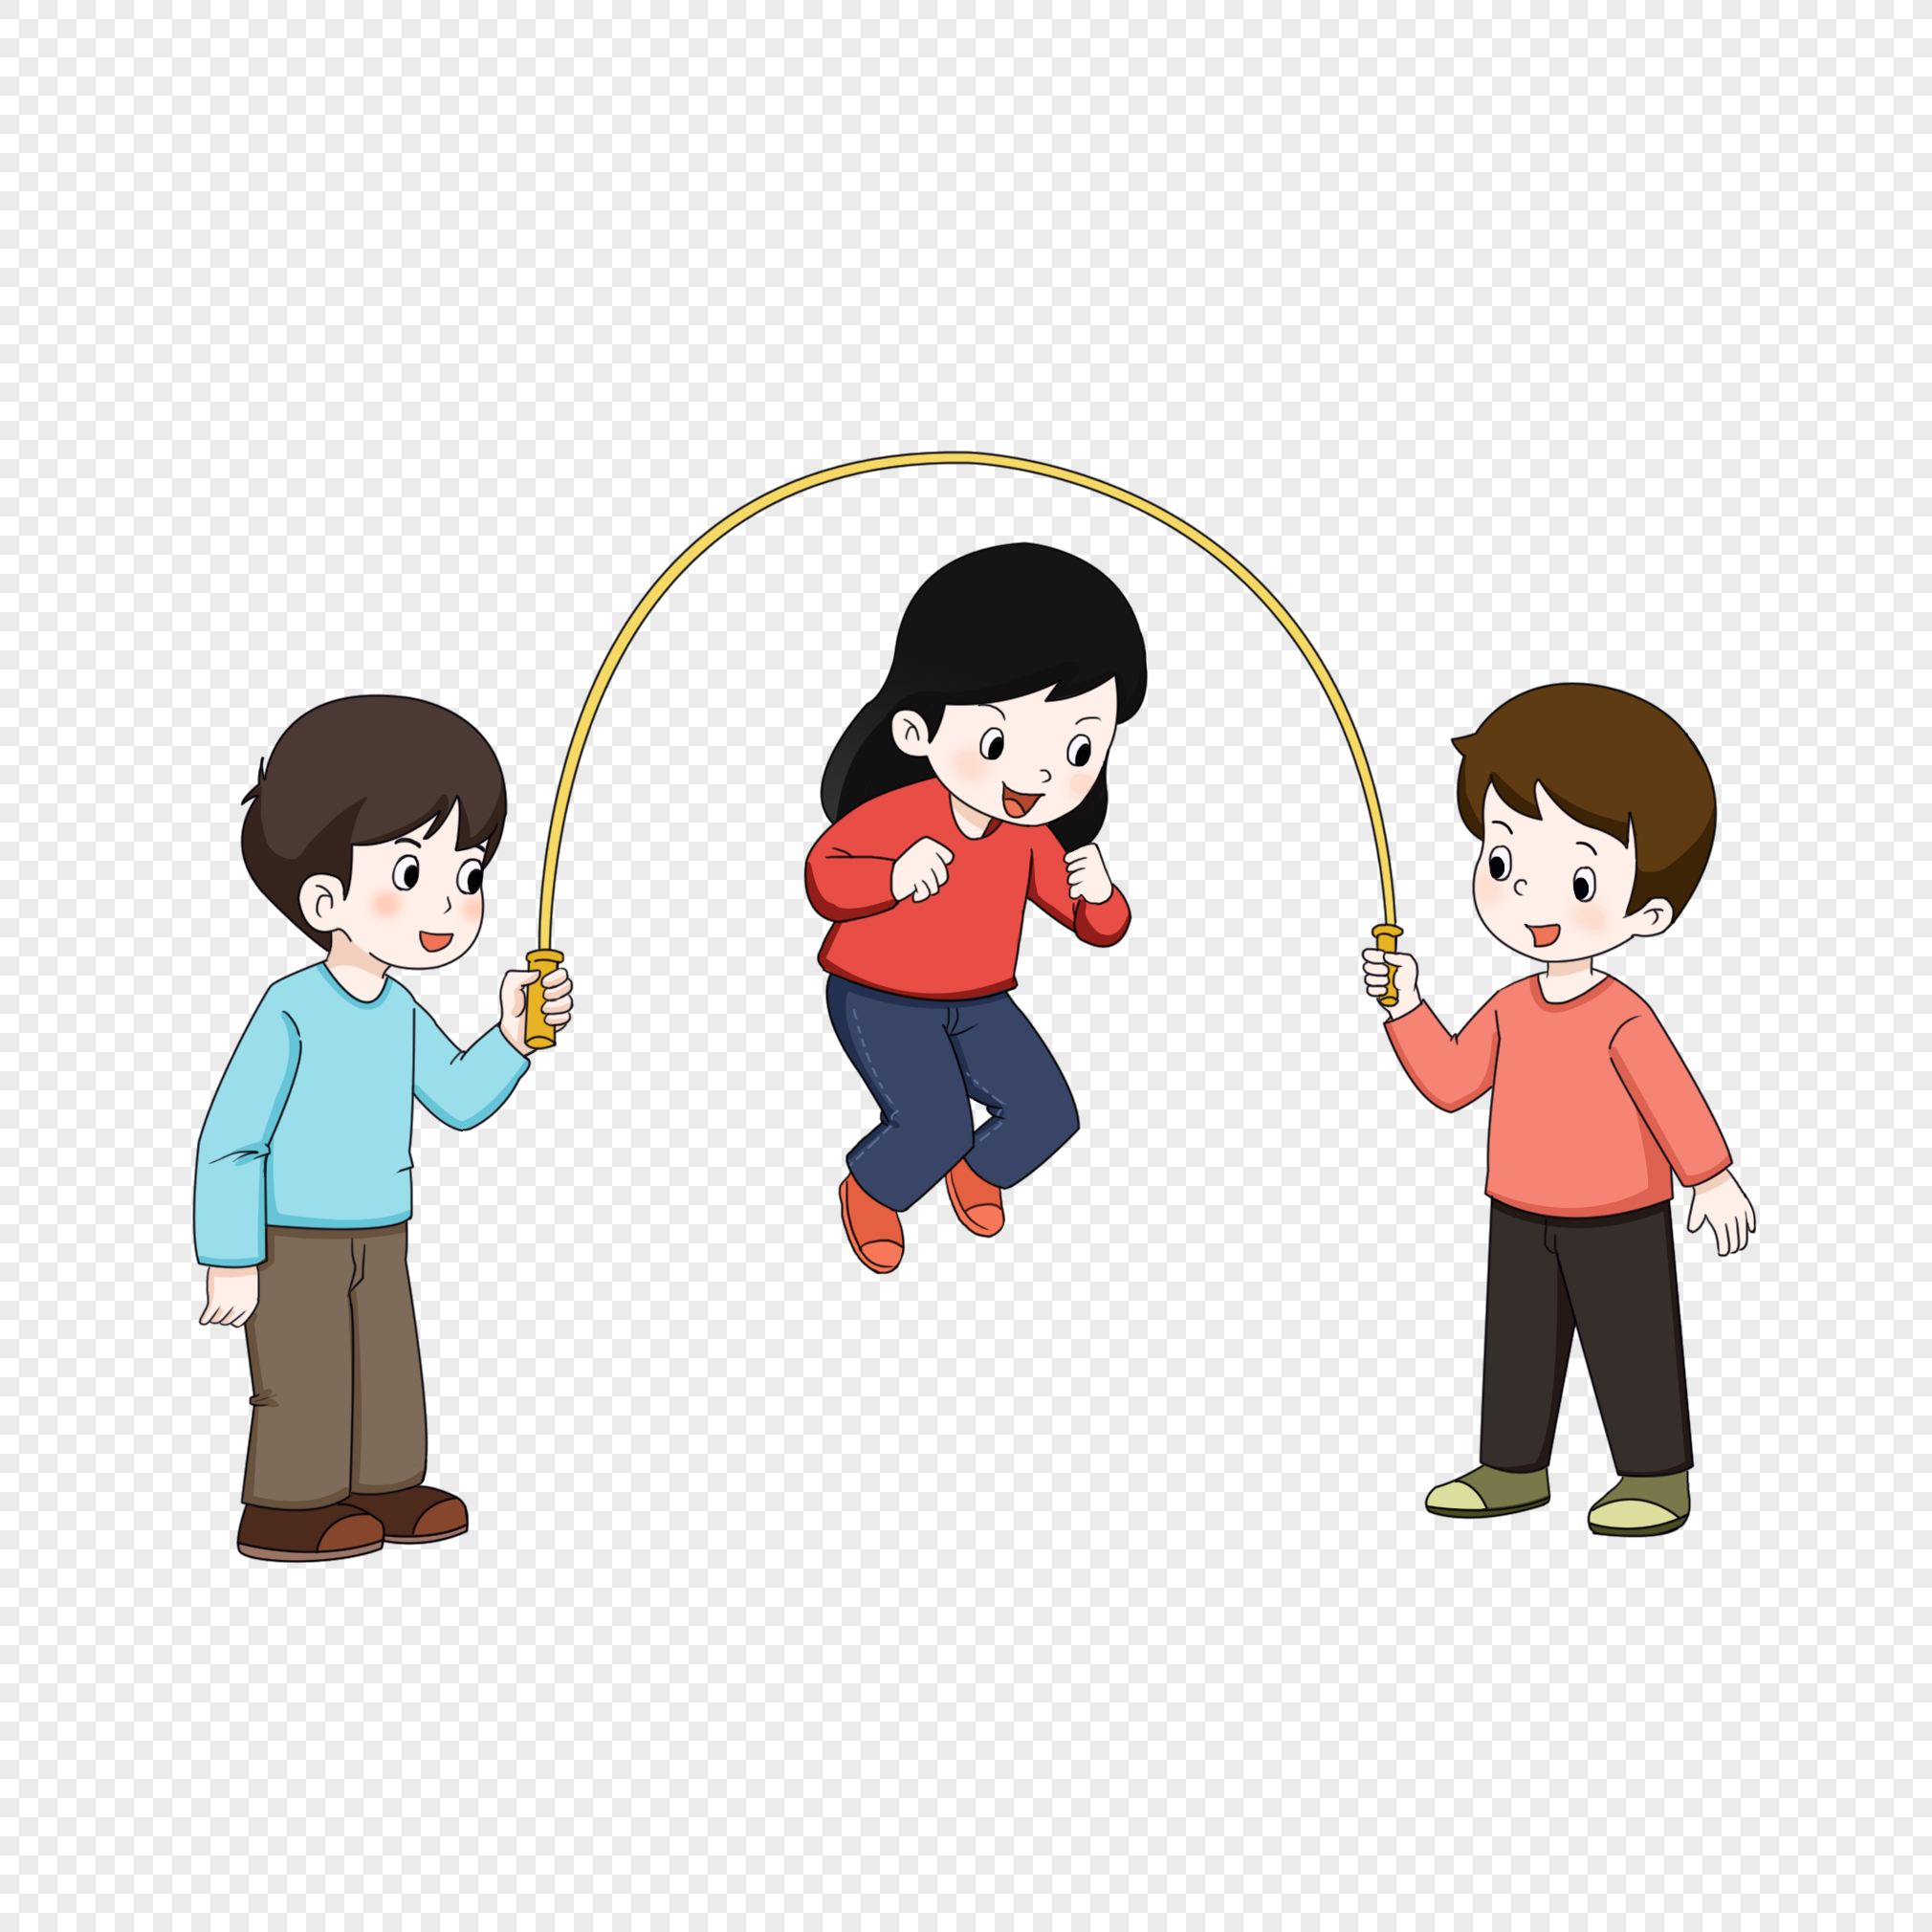 Kids Jumping Rope PNG Images With Transparent Background